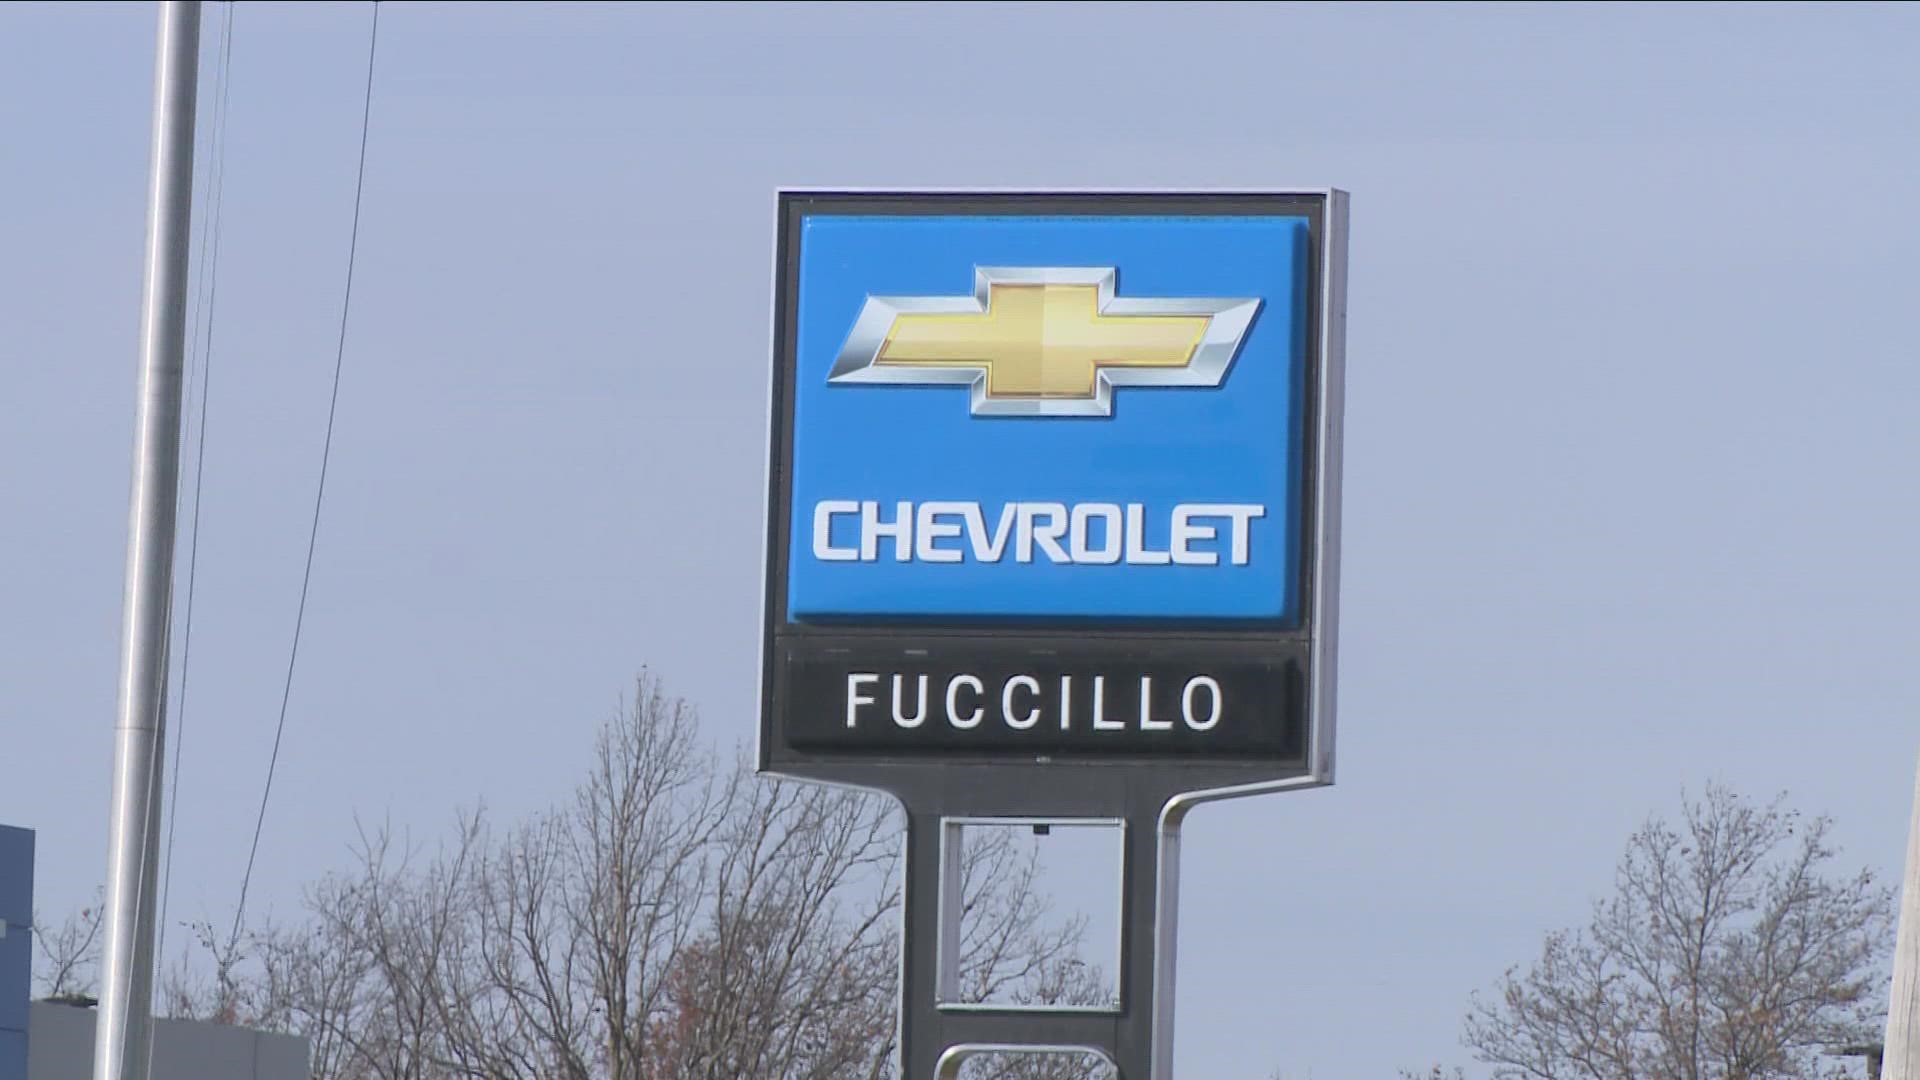 The Maguire Family of Dealerships has bought four properties... including Fuccillo's Toyota... Chevrolet... and Hyundai dealerships... for 14 million dollars.